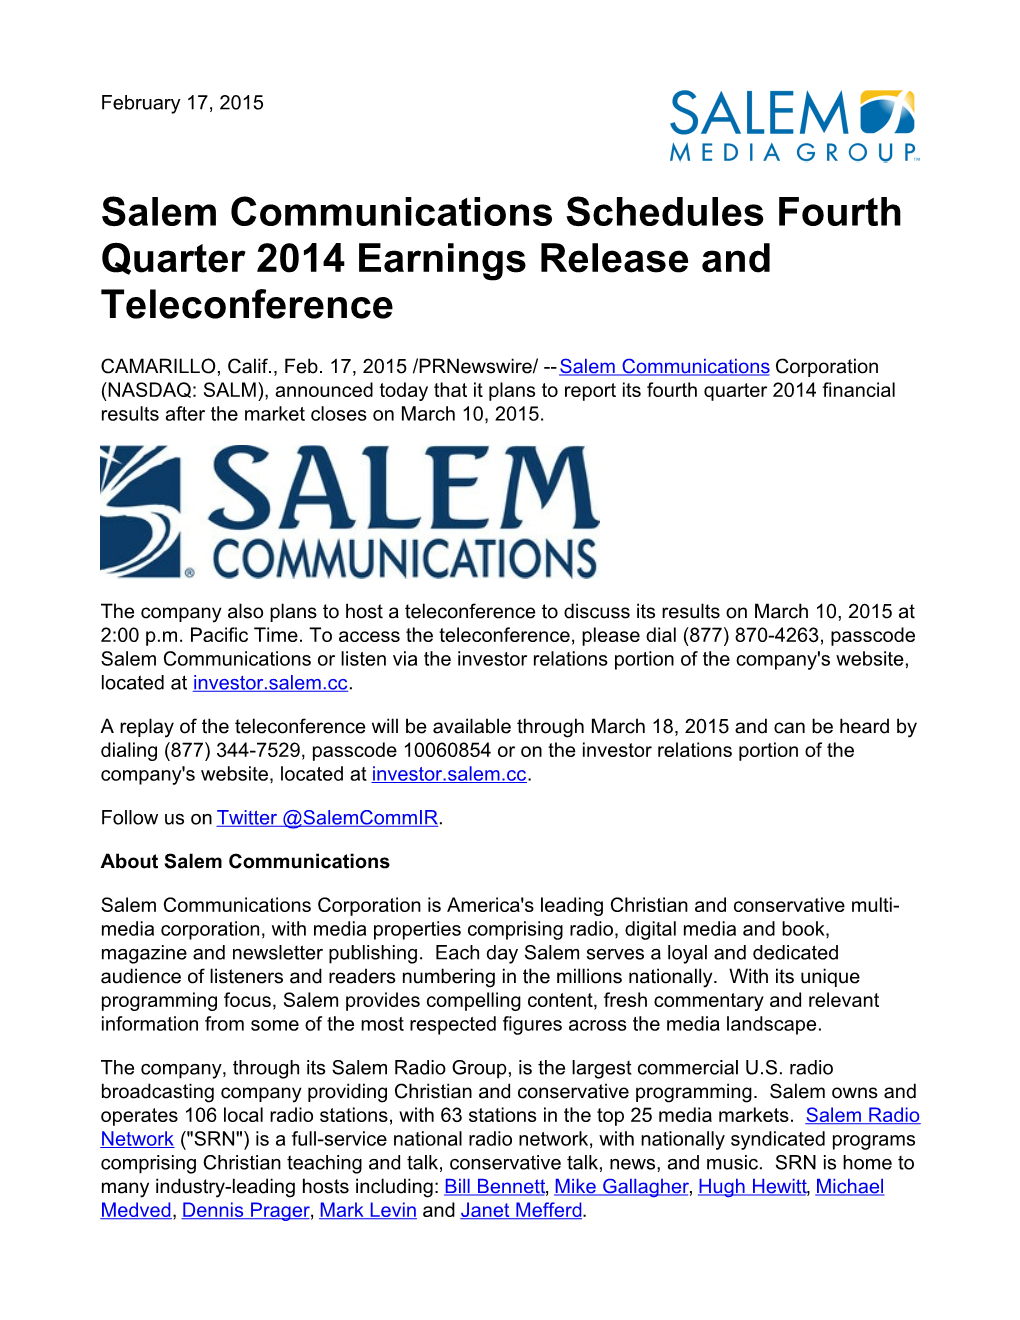 Salem Communications Schedules Fourth Quarter 2014 Earnings Release and Teleconference